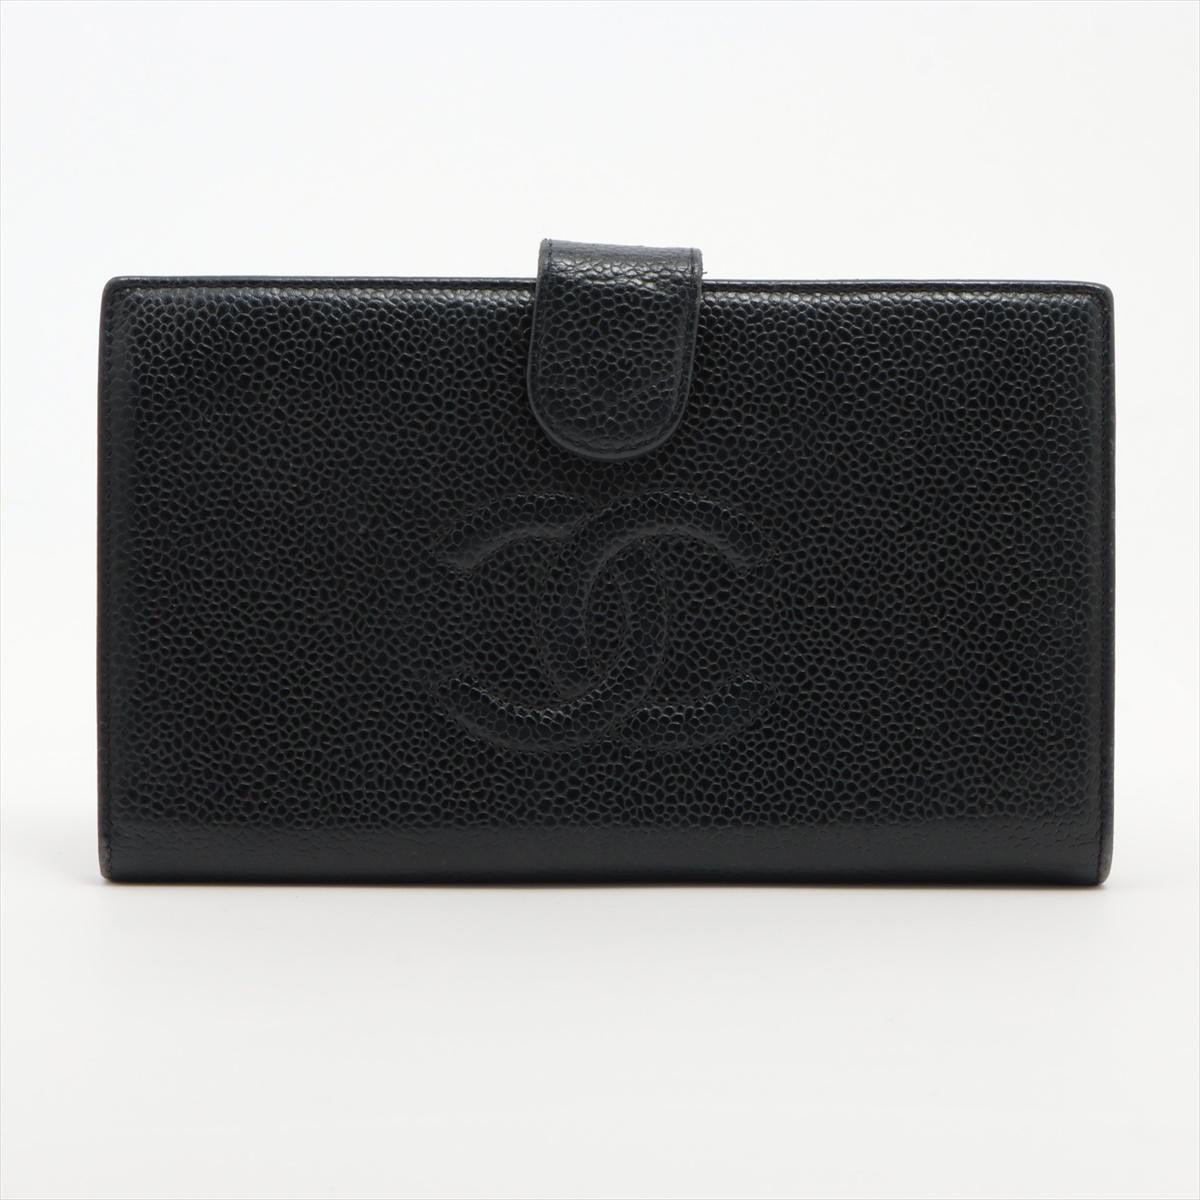 The Chanel CC Logo Caviar Skin Bi-fold Coin Card Wallet in Black is a sophisticated and timeless accessory that embodies the elegance of the Chanel brand. Crafted from luxurious caviar skin leather, the wallet features iconic CC logo embossed on the